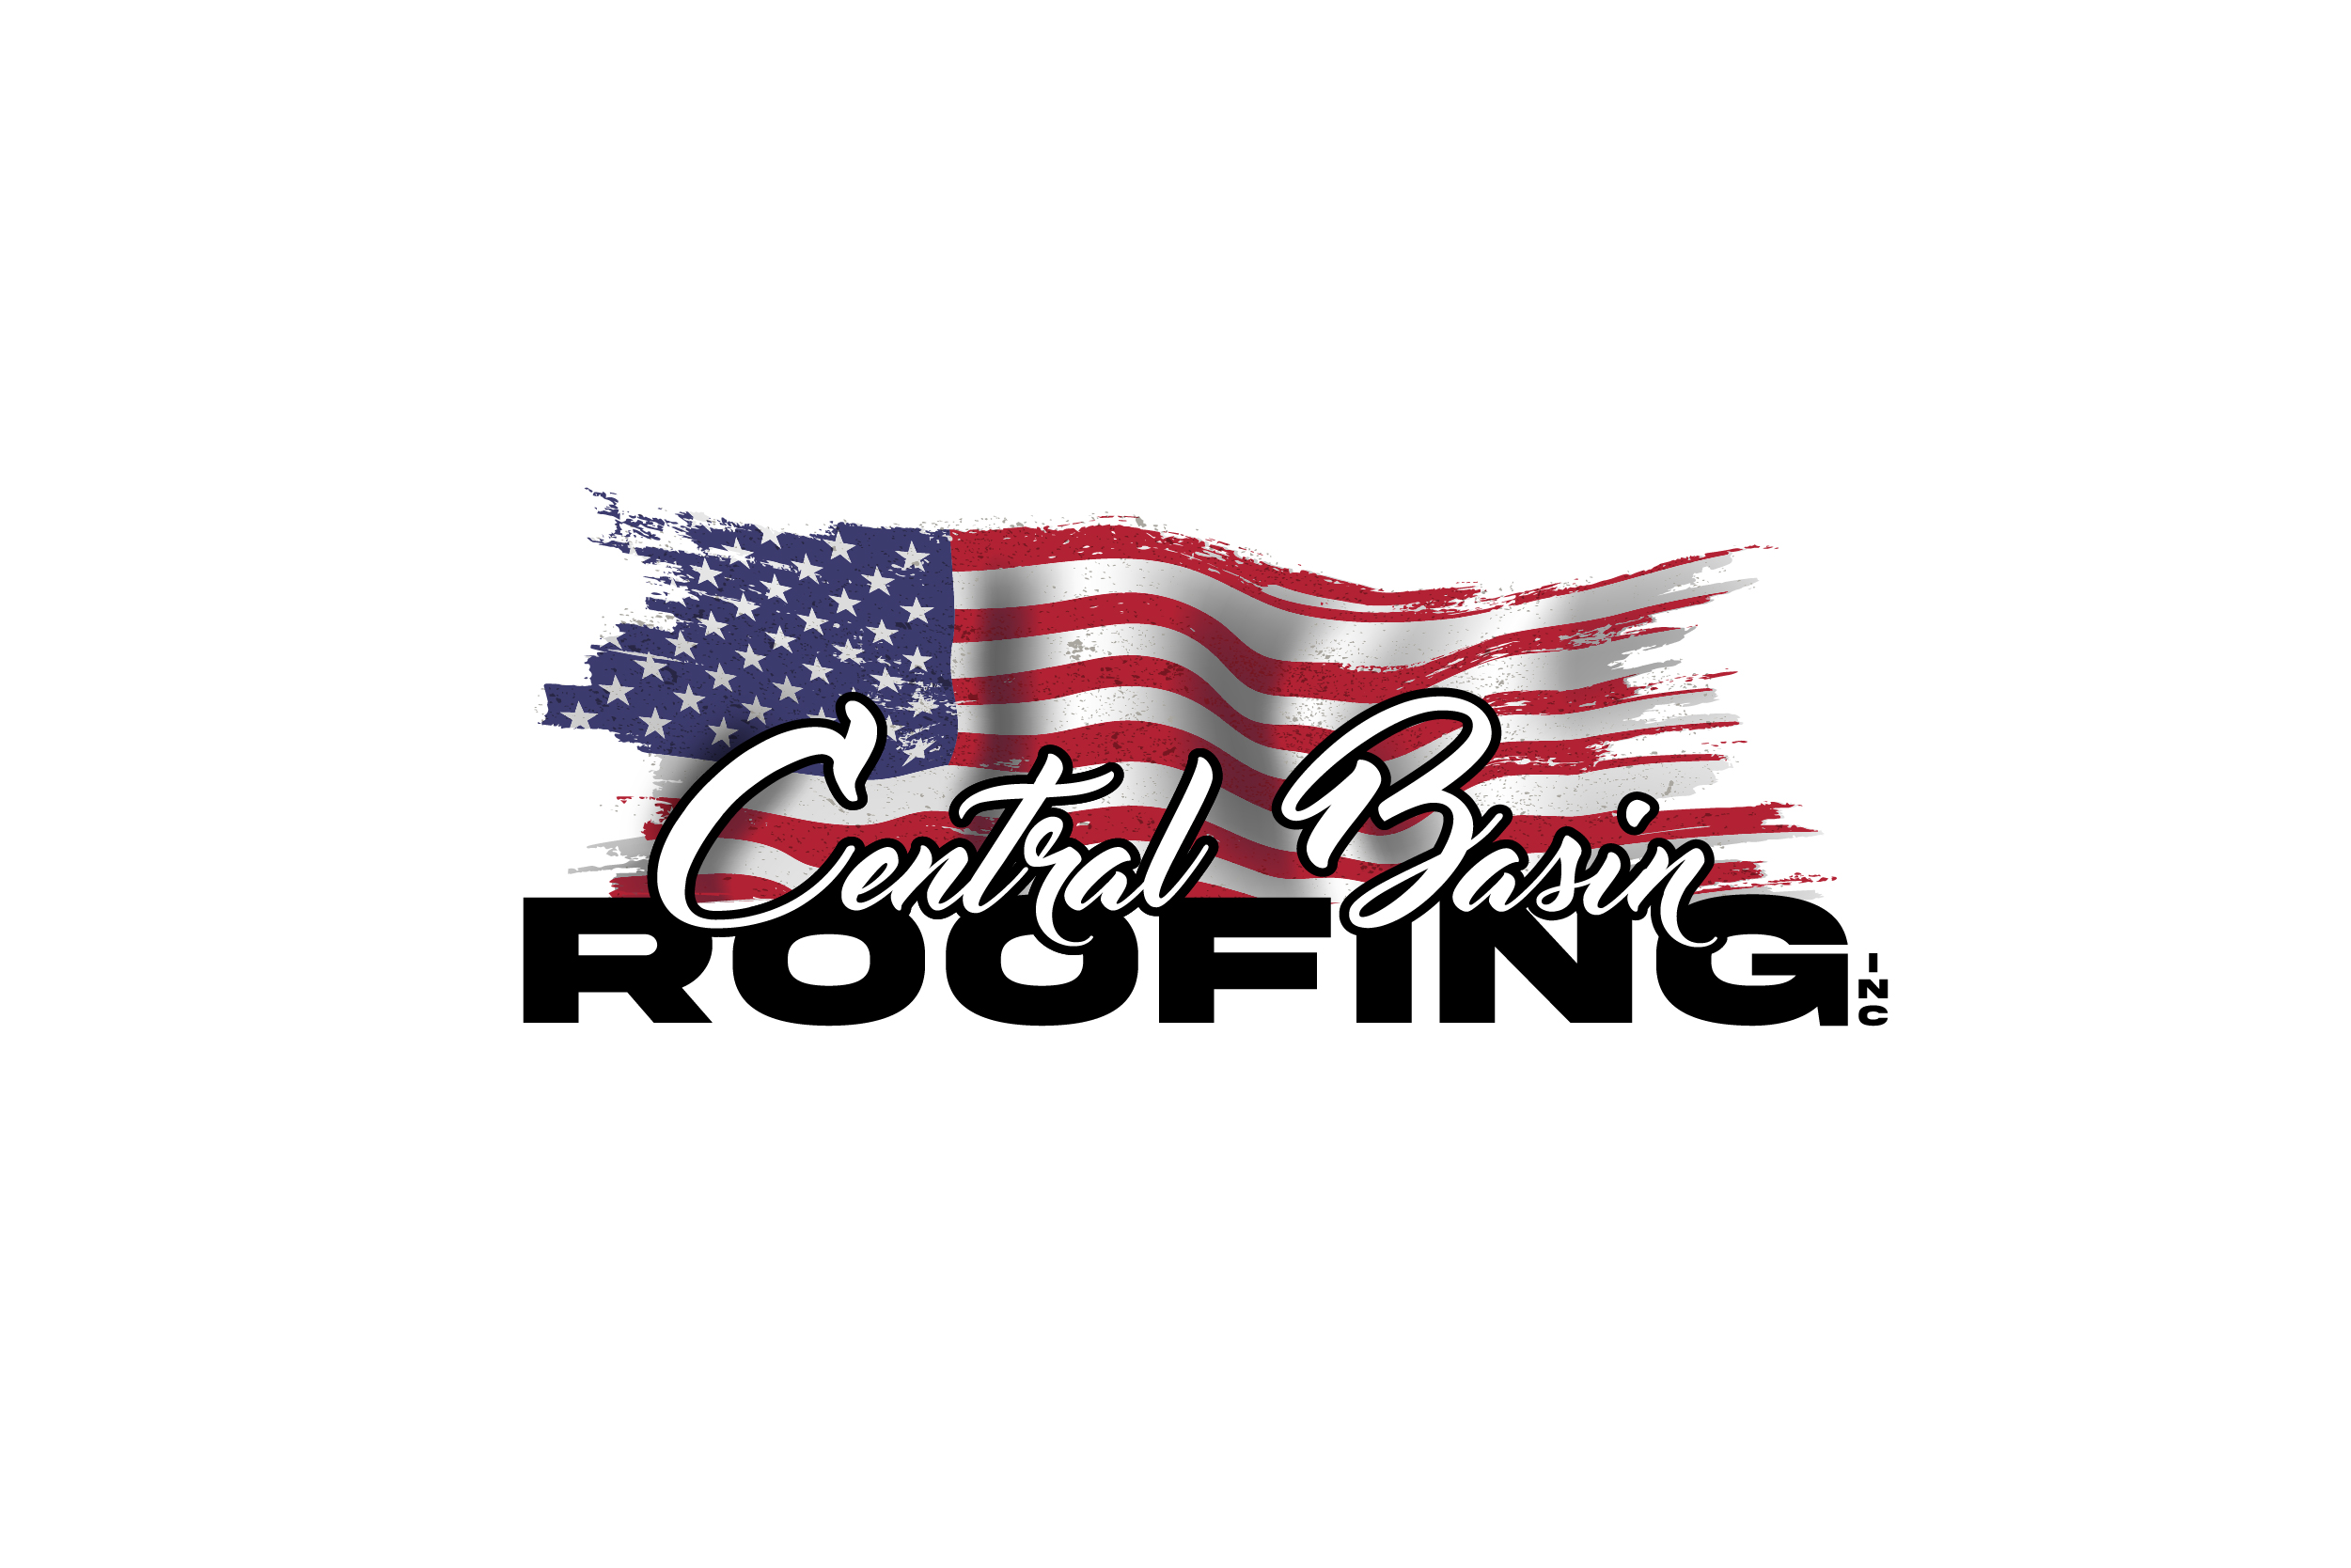 Central Basin Roofing Inc